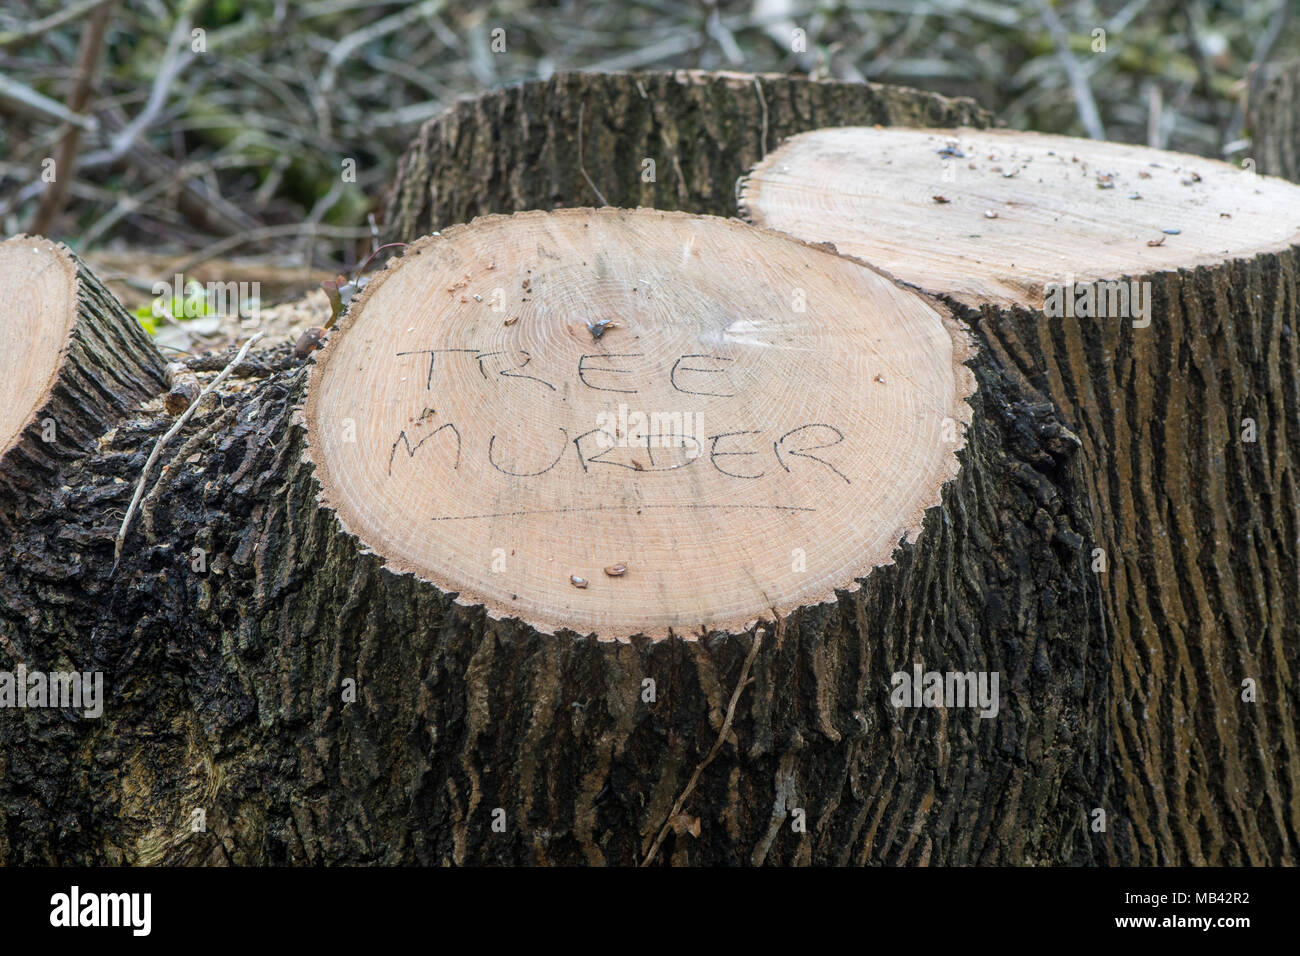 Tree Murder written on felled tree. A local has expressed displeasure with decision to cut down large deciduous tree in Bath, Somerset, UK Stock Photo